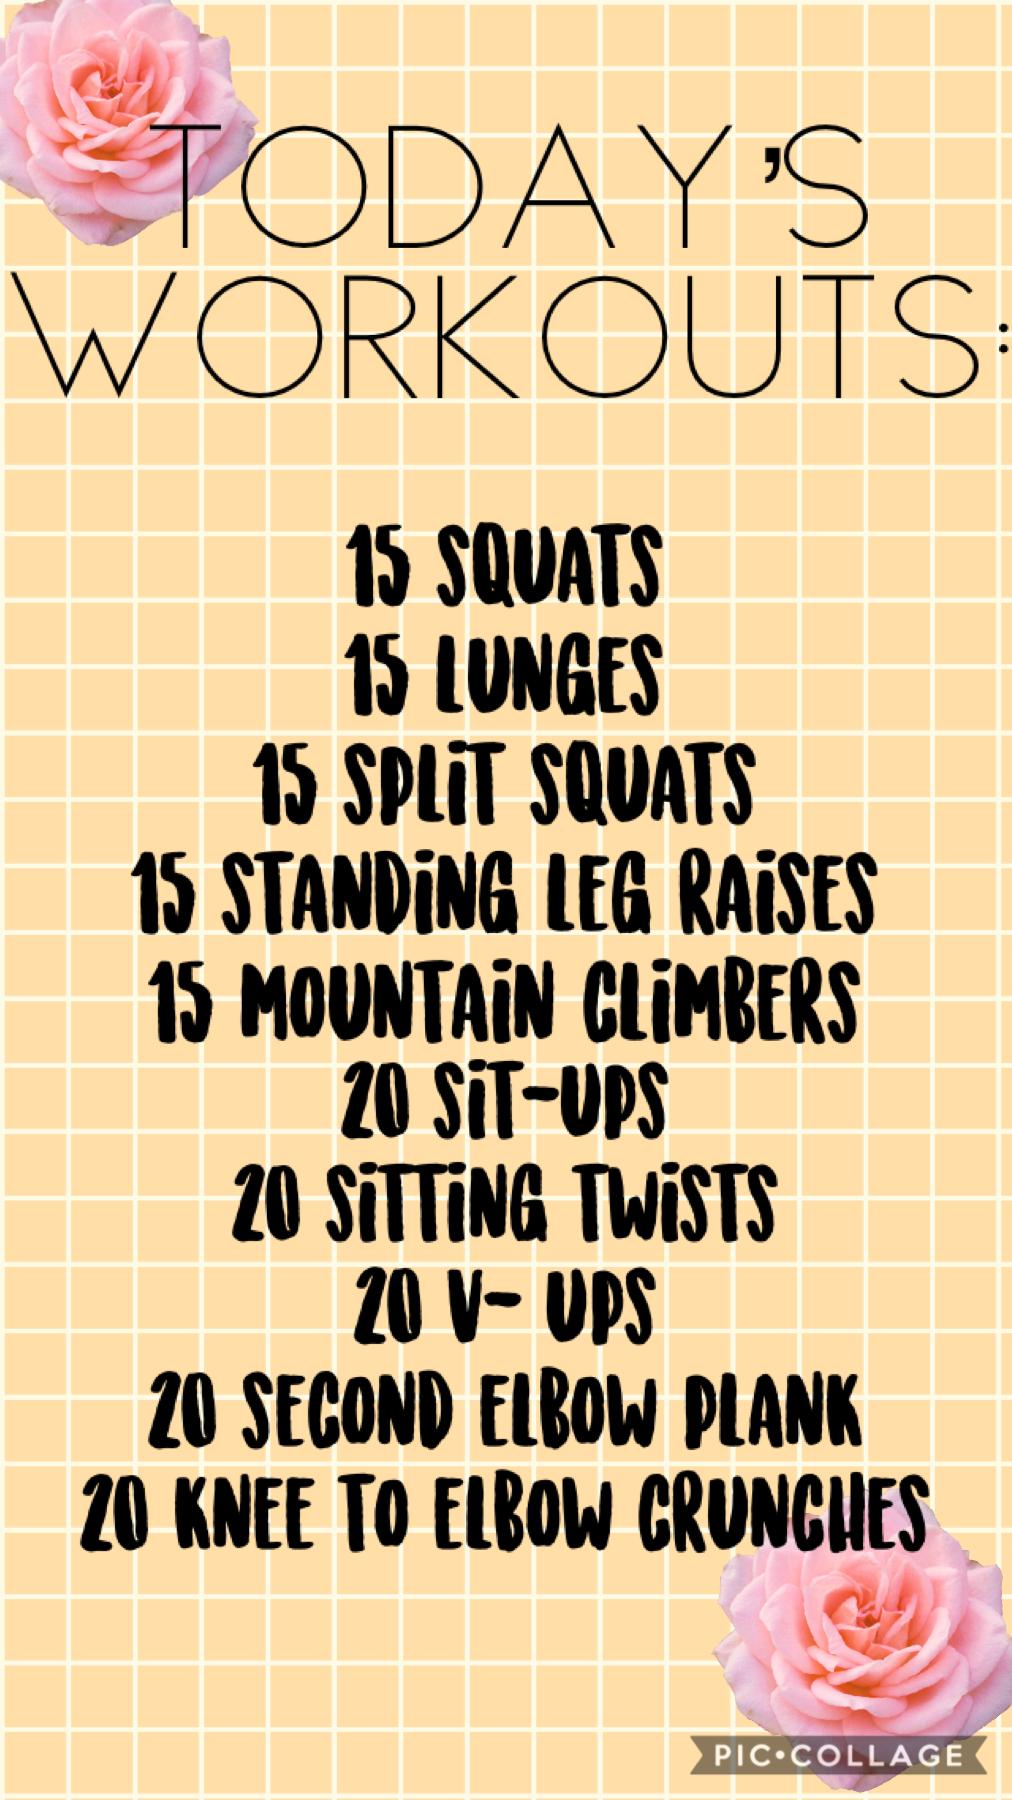 Here r some workouts y’all can do today!